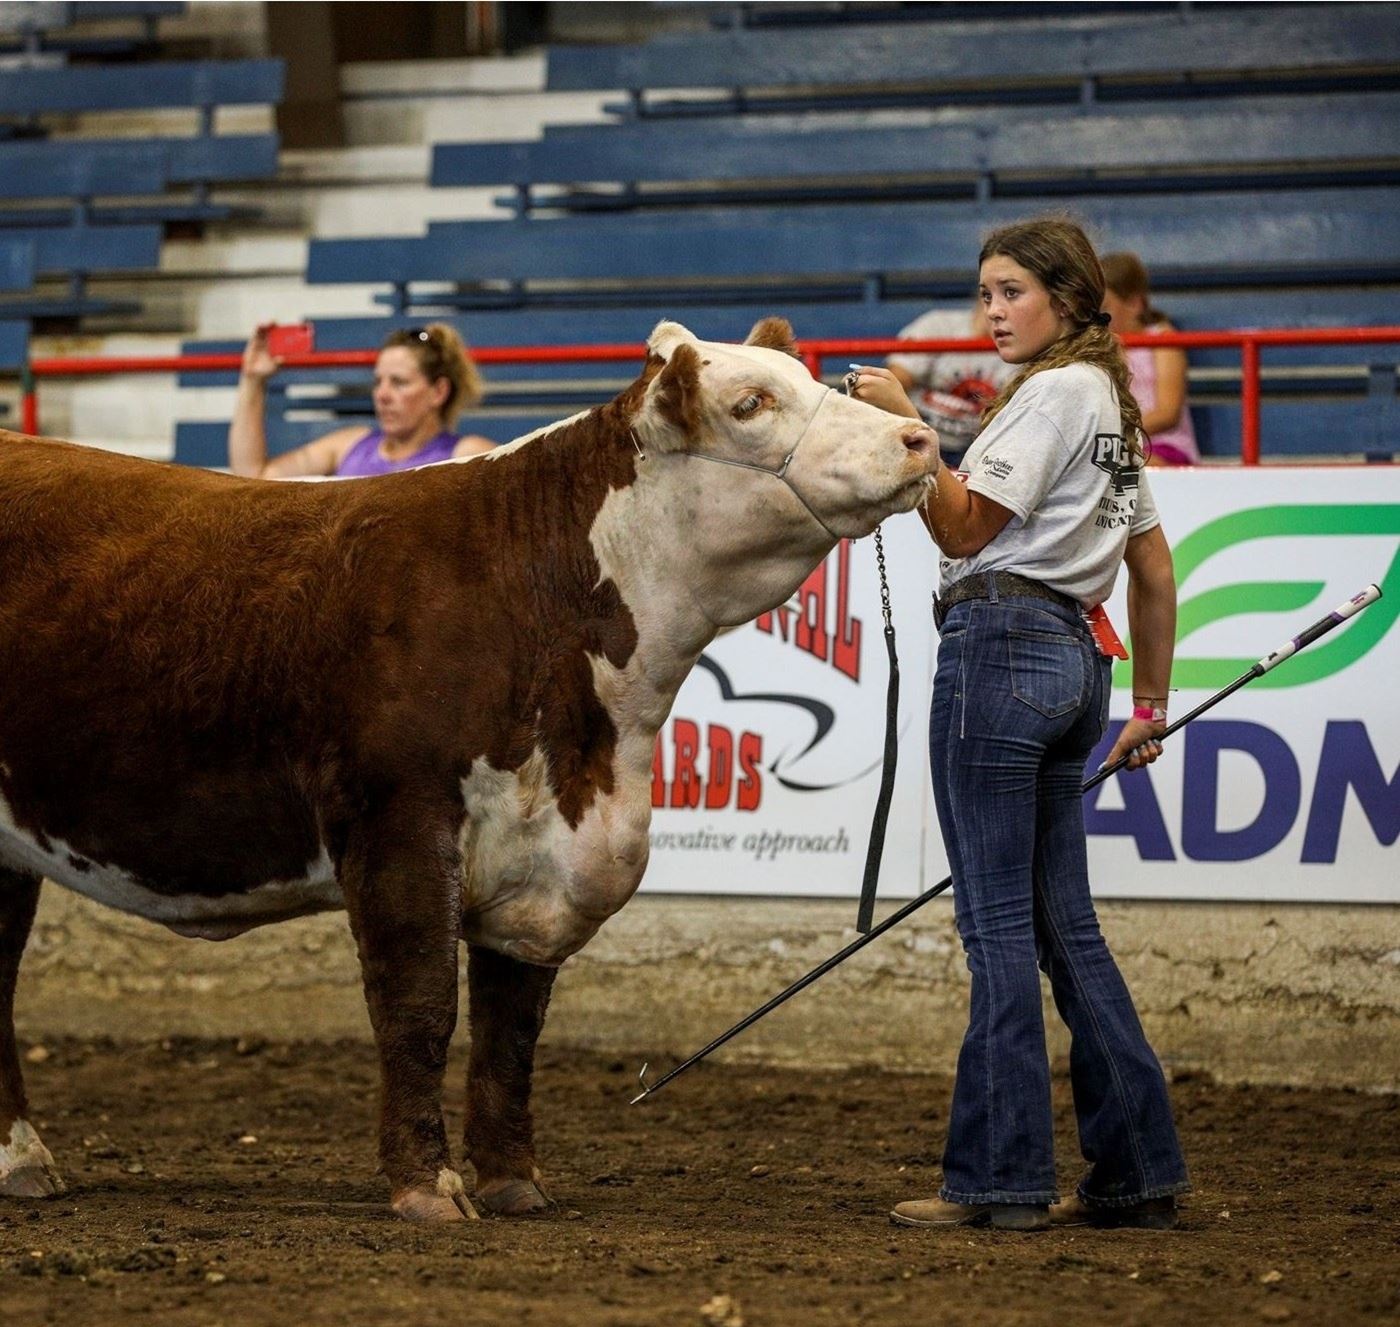 Girl showing a hereford beef cattle.